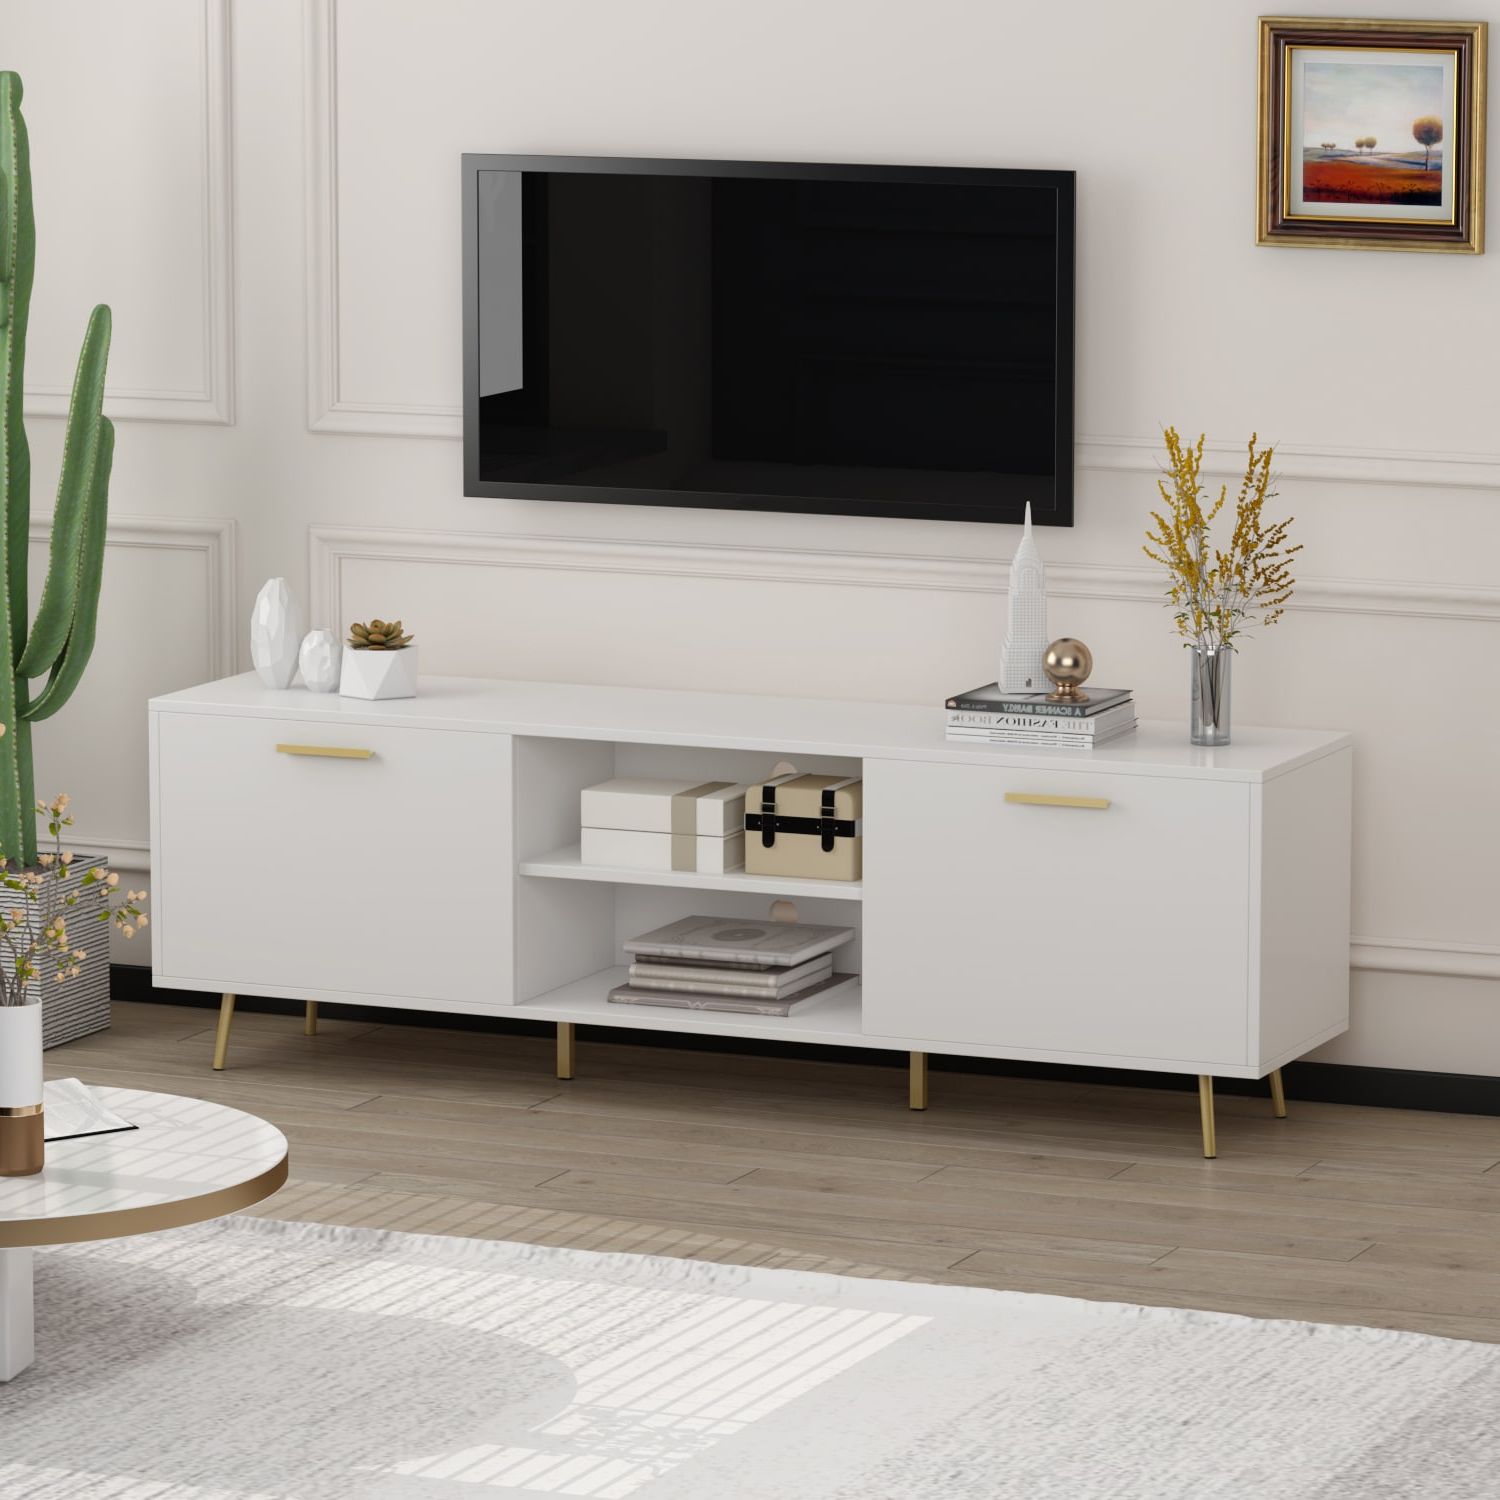 Fufu&gaga Tv Cabinet Stand Modern/contemporary White Tv Cabinet Integrated  Tv Mount (accommodates Tvs Up To 70 In) In The Tv Stands Department At  Lowes Regarding White Tv Stands Entertainment Center (View 7 of 20)